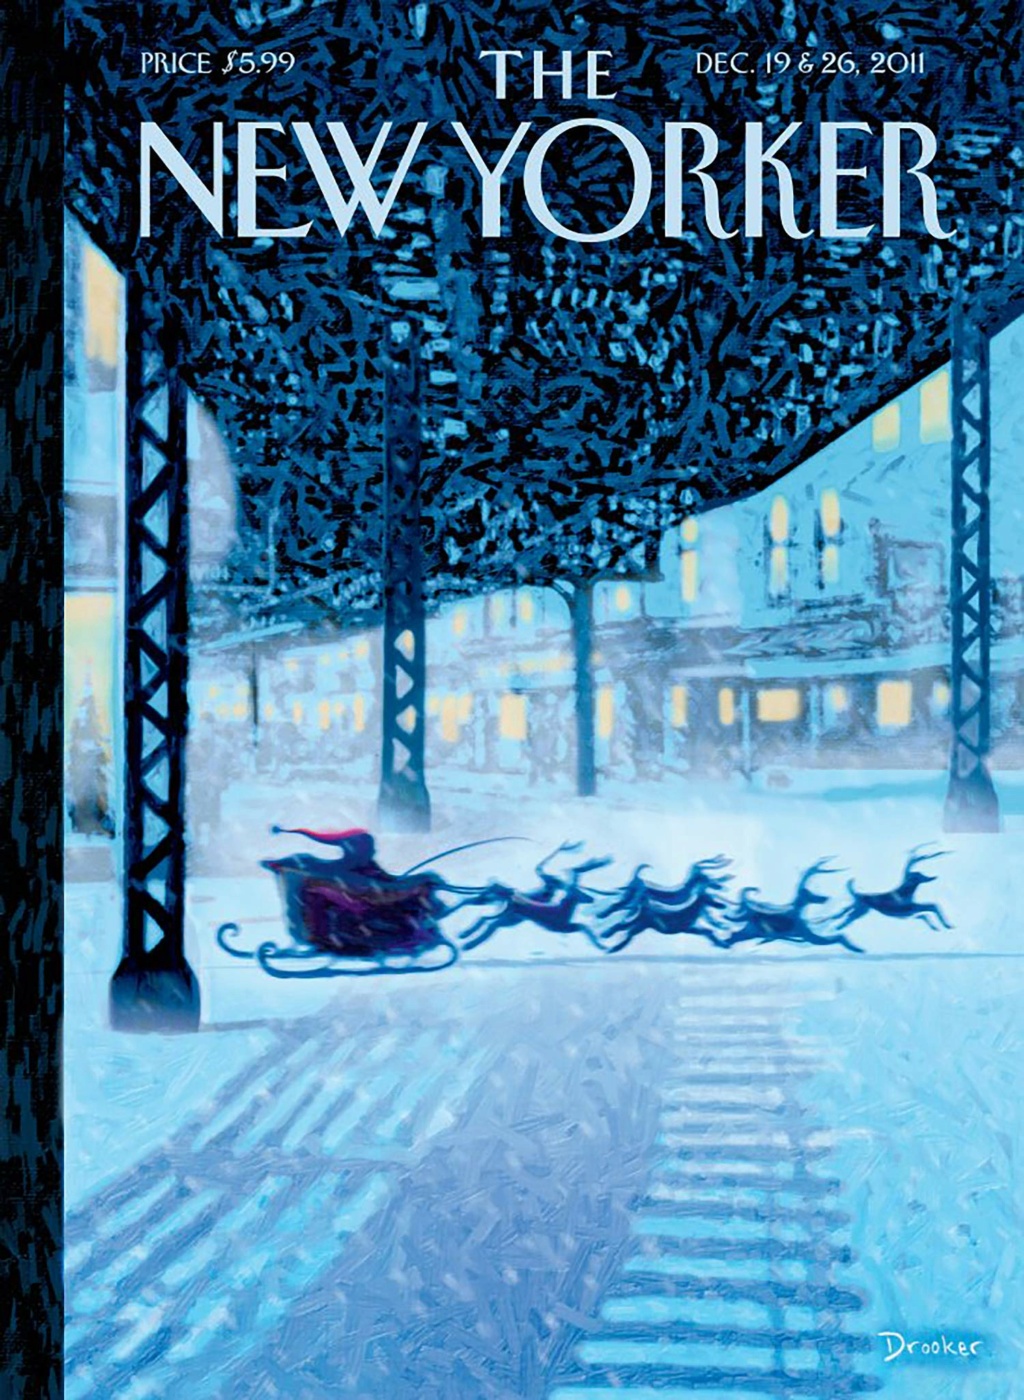 The New Yorker : Les couvertures - Page 4 Ny_20110